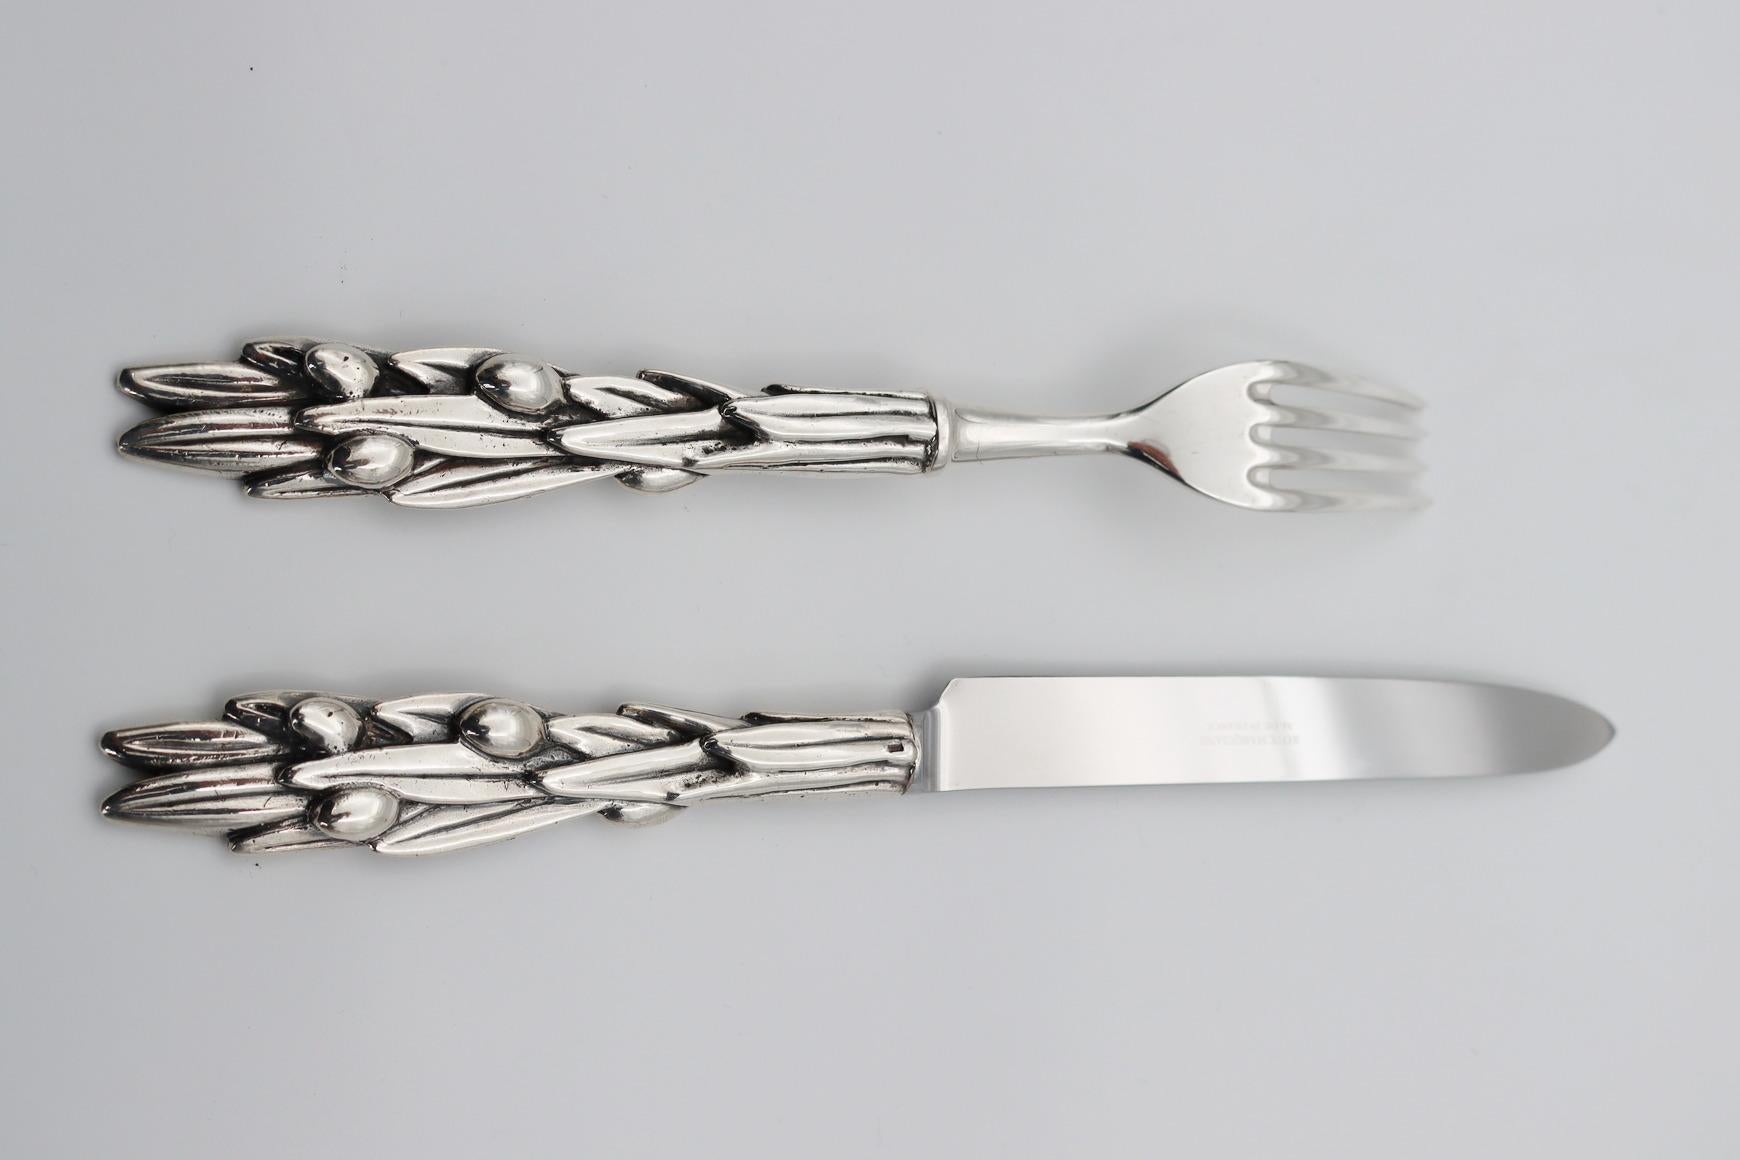 Olivier set of 2 pieces in silver bronze or gold bronze

Set of 2 pieces (table forks/fish, table knife or meat/fish knife) in silver bronze 35/42 microns

It is possible to order all products separately or set of 4 piece

Table spoon
Table